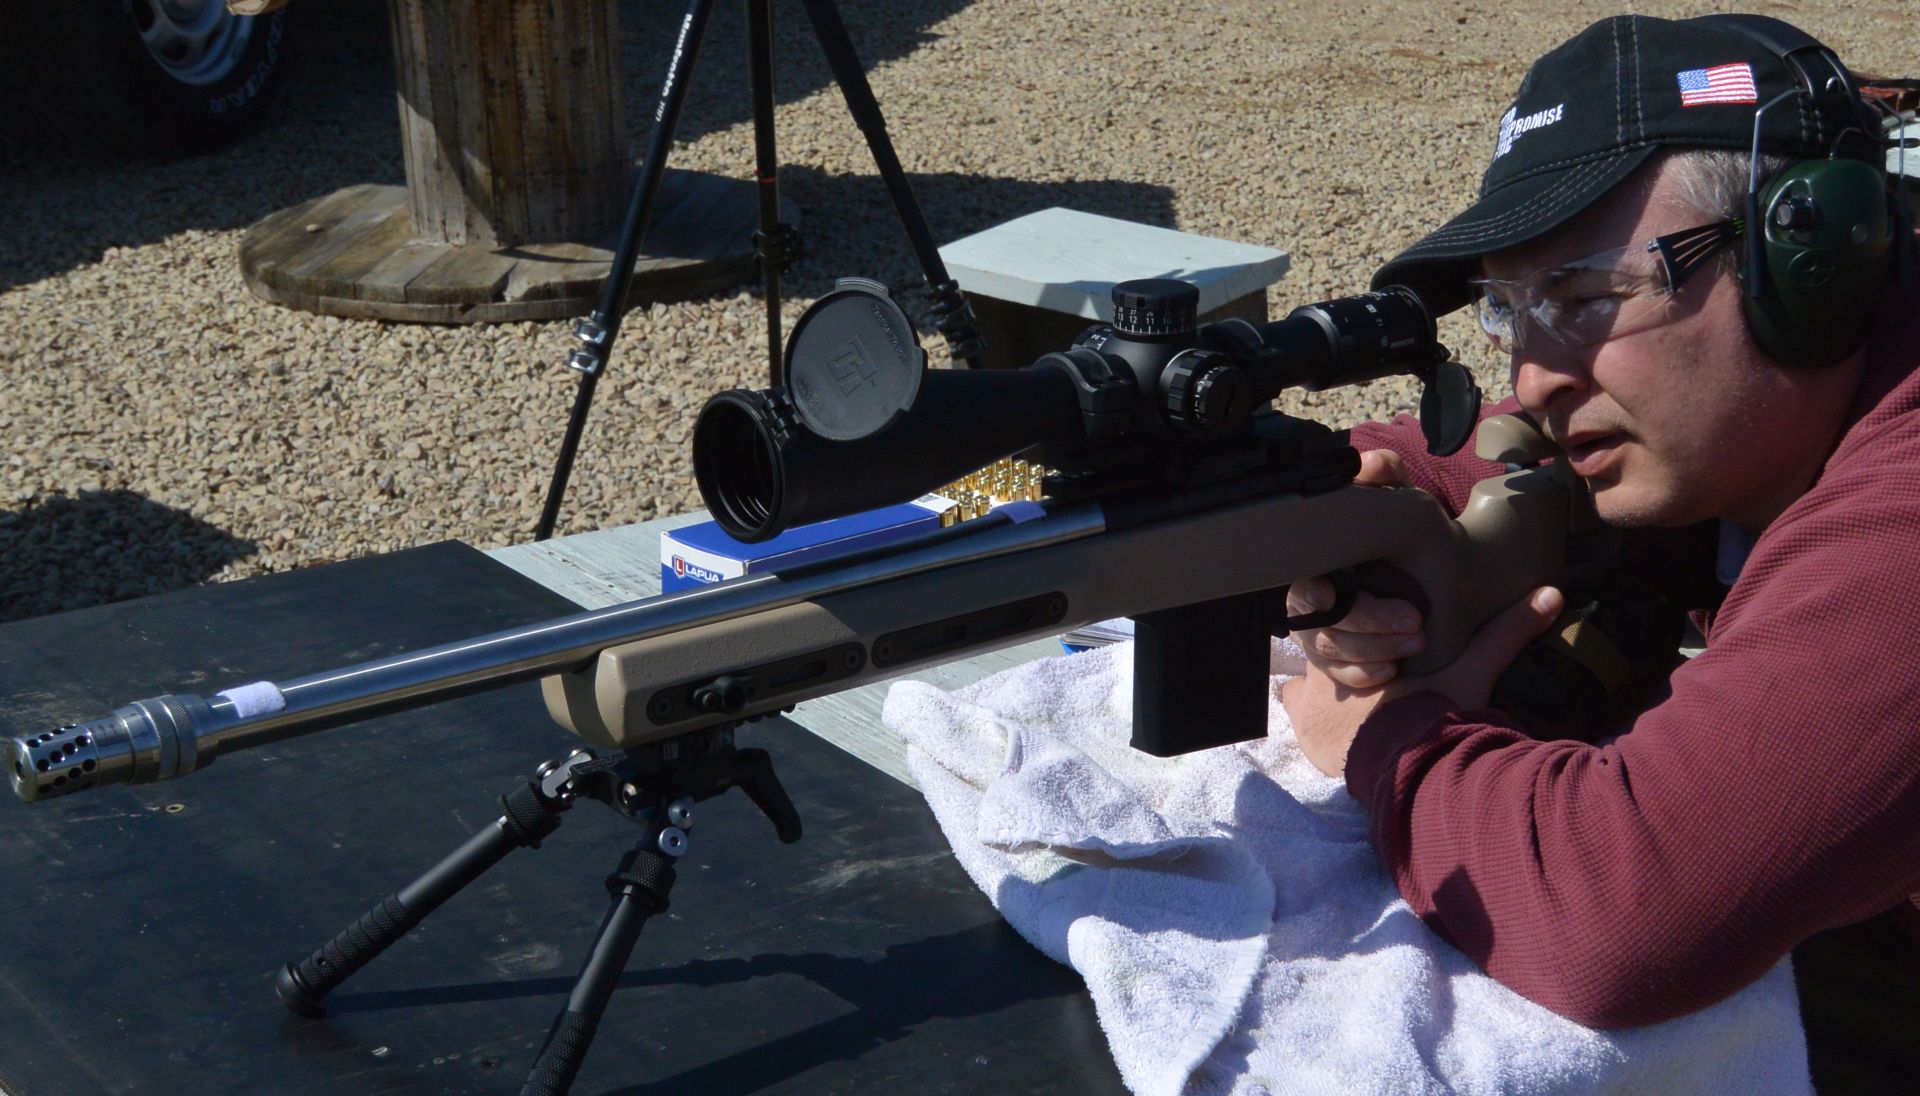 Doing some long range shooting with Minox ZP5 5-25x56 on a Kelbly's Atlas Tactical, in a Grayboe Ridgeback stock